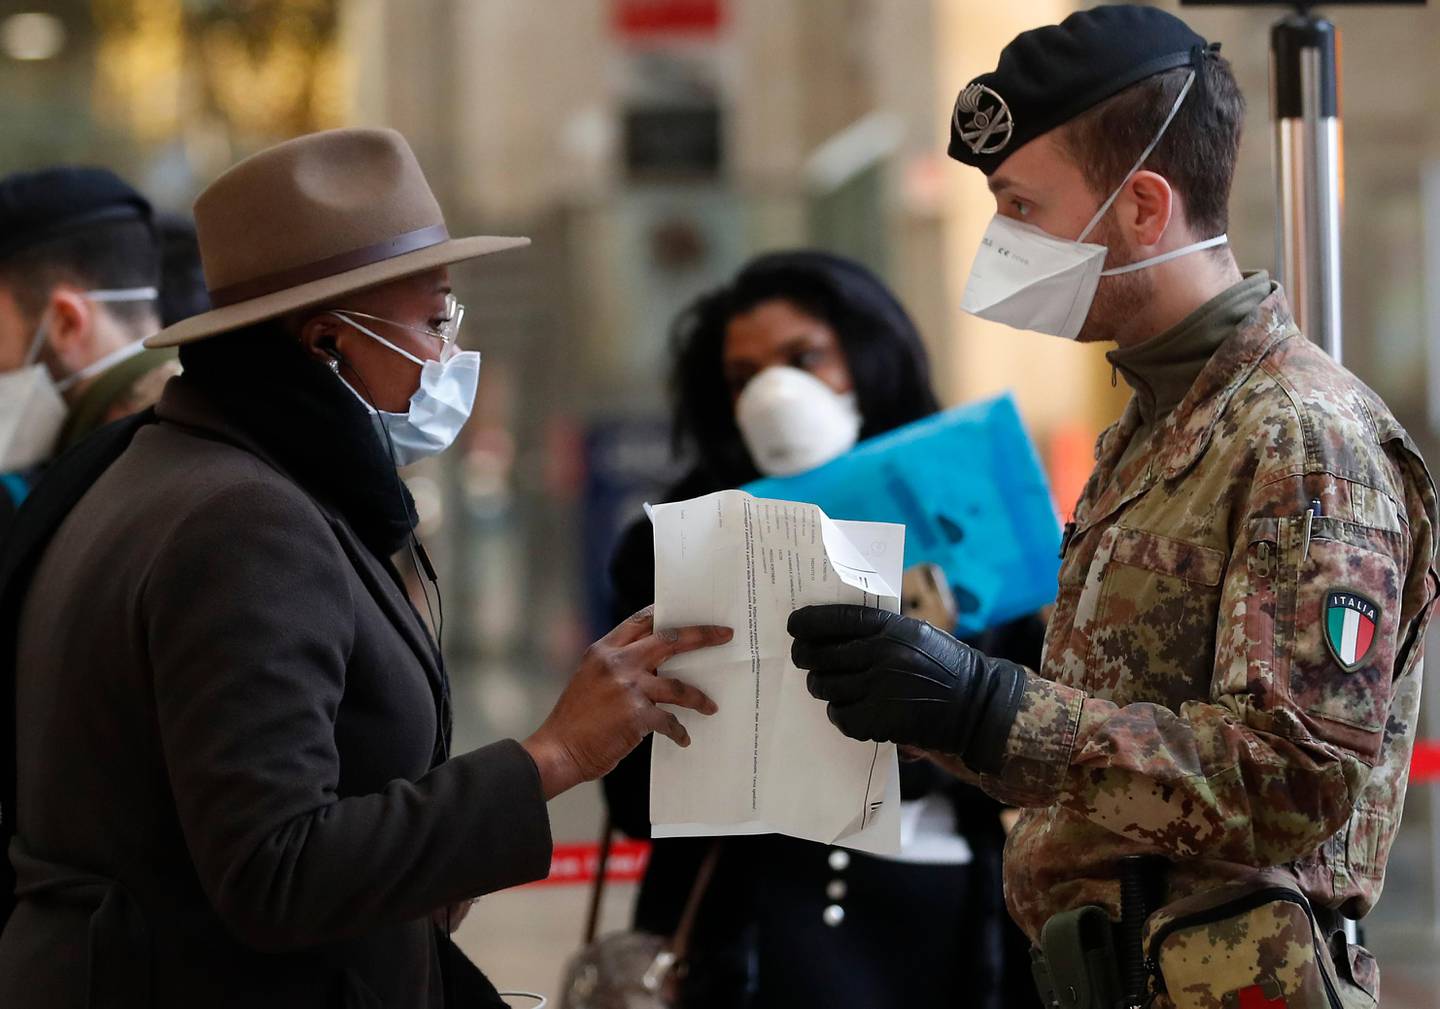 Police officers and soldiers check passengers leaving from Milan main train station, Italy, Monday, March 9, 2020. Italy took a page from China's playbook Sunday, attempting to lock down 16 million people  more than a quarter of its population  for nearly a month to halt the relentless march of the new coronavirus across Europe. Italian Premier Giuseppe Conte signed a quarantine decree early Sunday for the country's prosperous north. Areas under lockdown include Milan, Italy's financial hub and the main city in Lombardy, and Venice, the main city in the neighboring Veneto region. (AP Photo/Antonio Calanni)